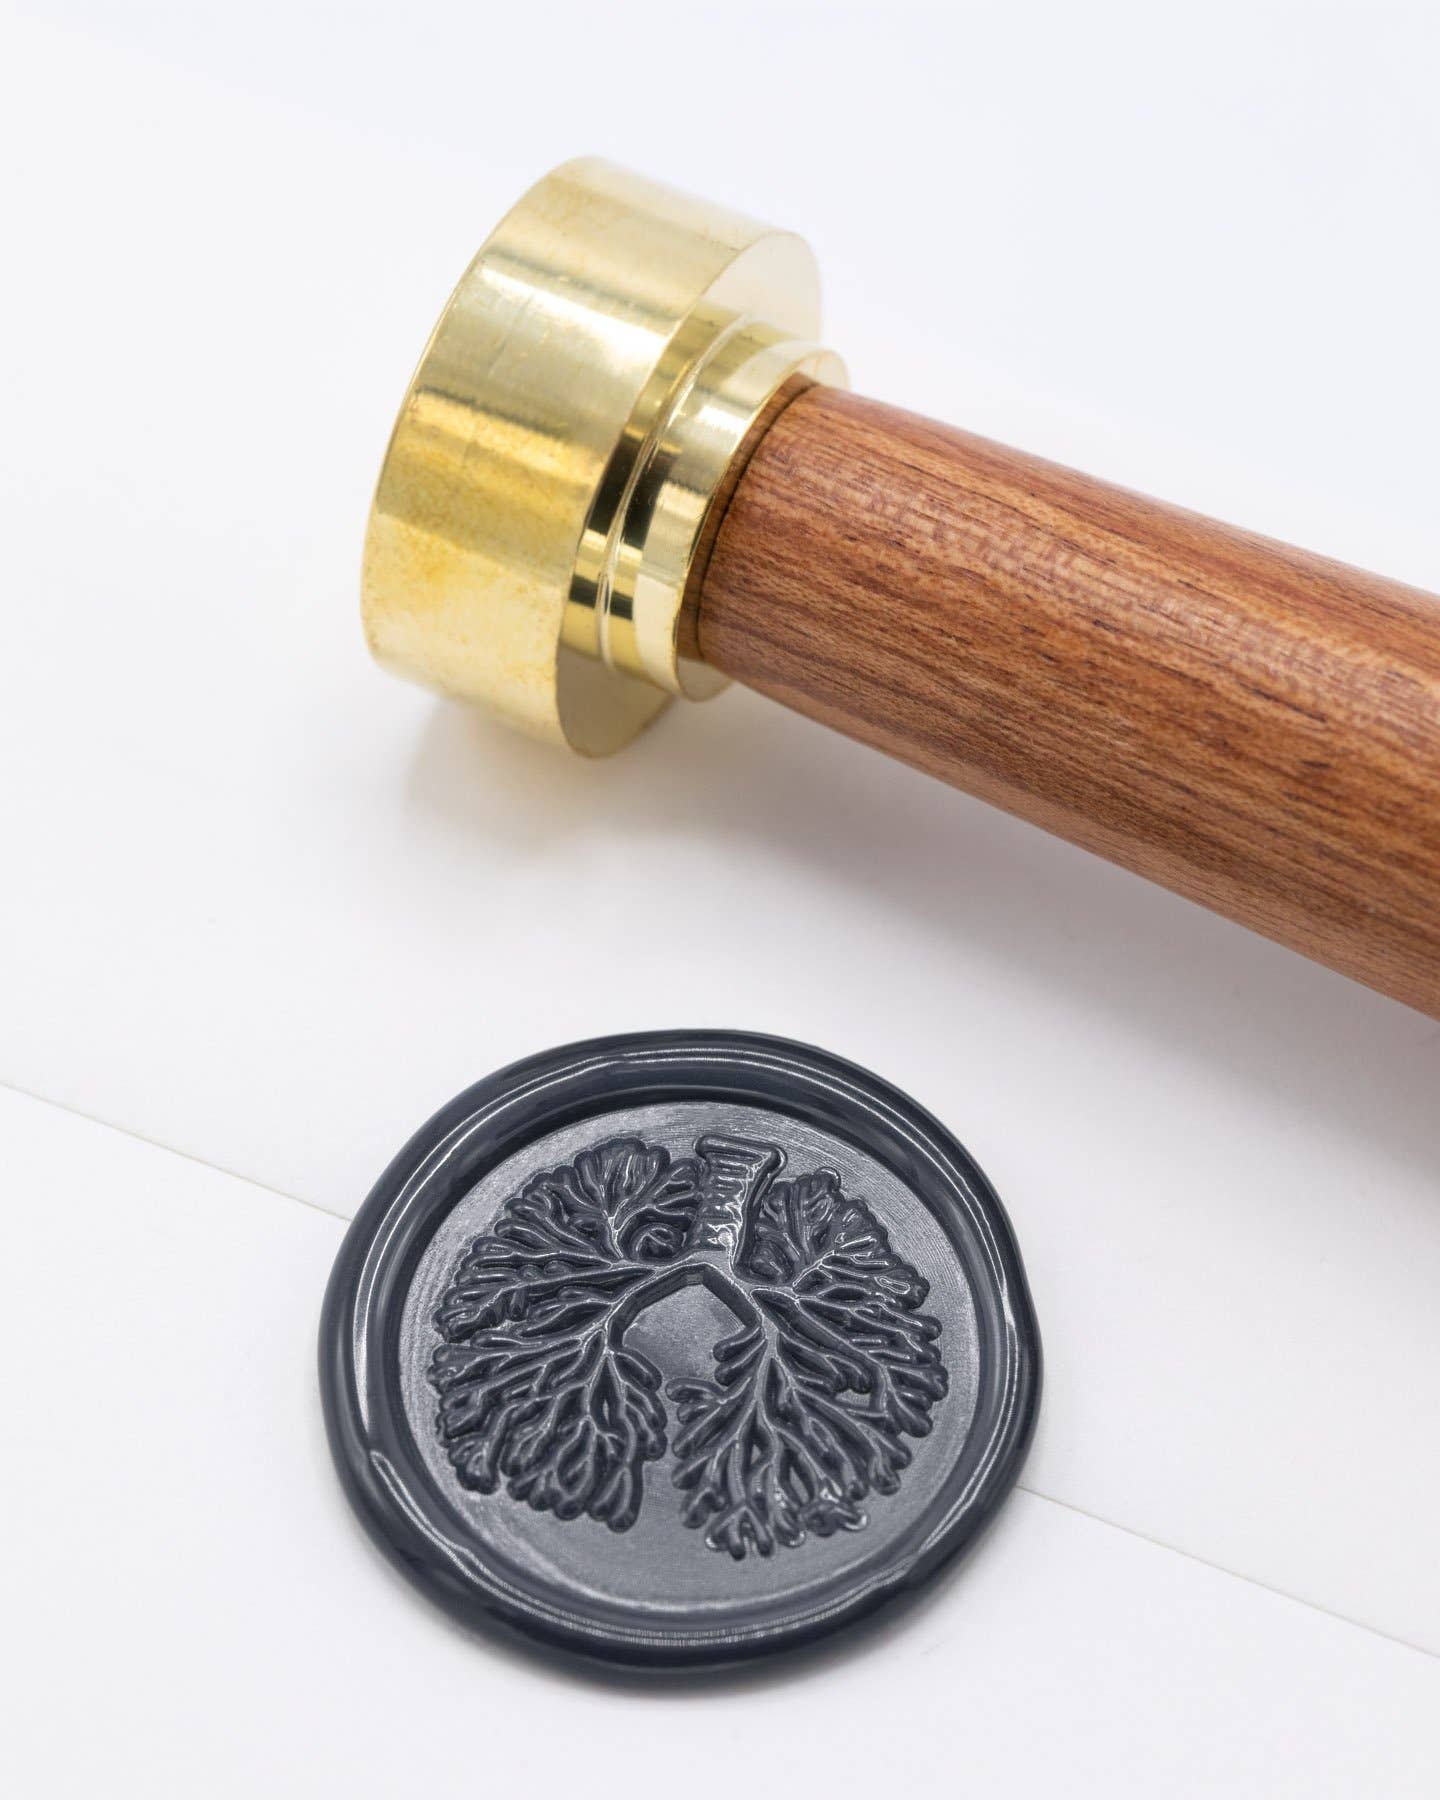 Anatomical Lungs Wax Seal Stamp